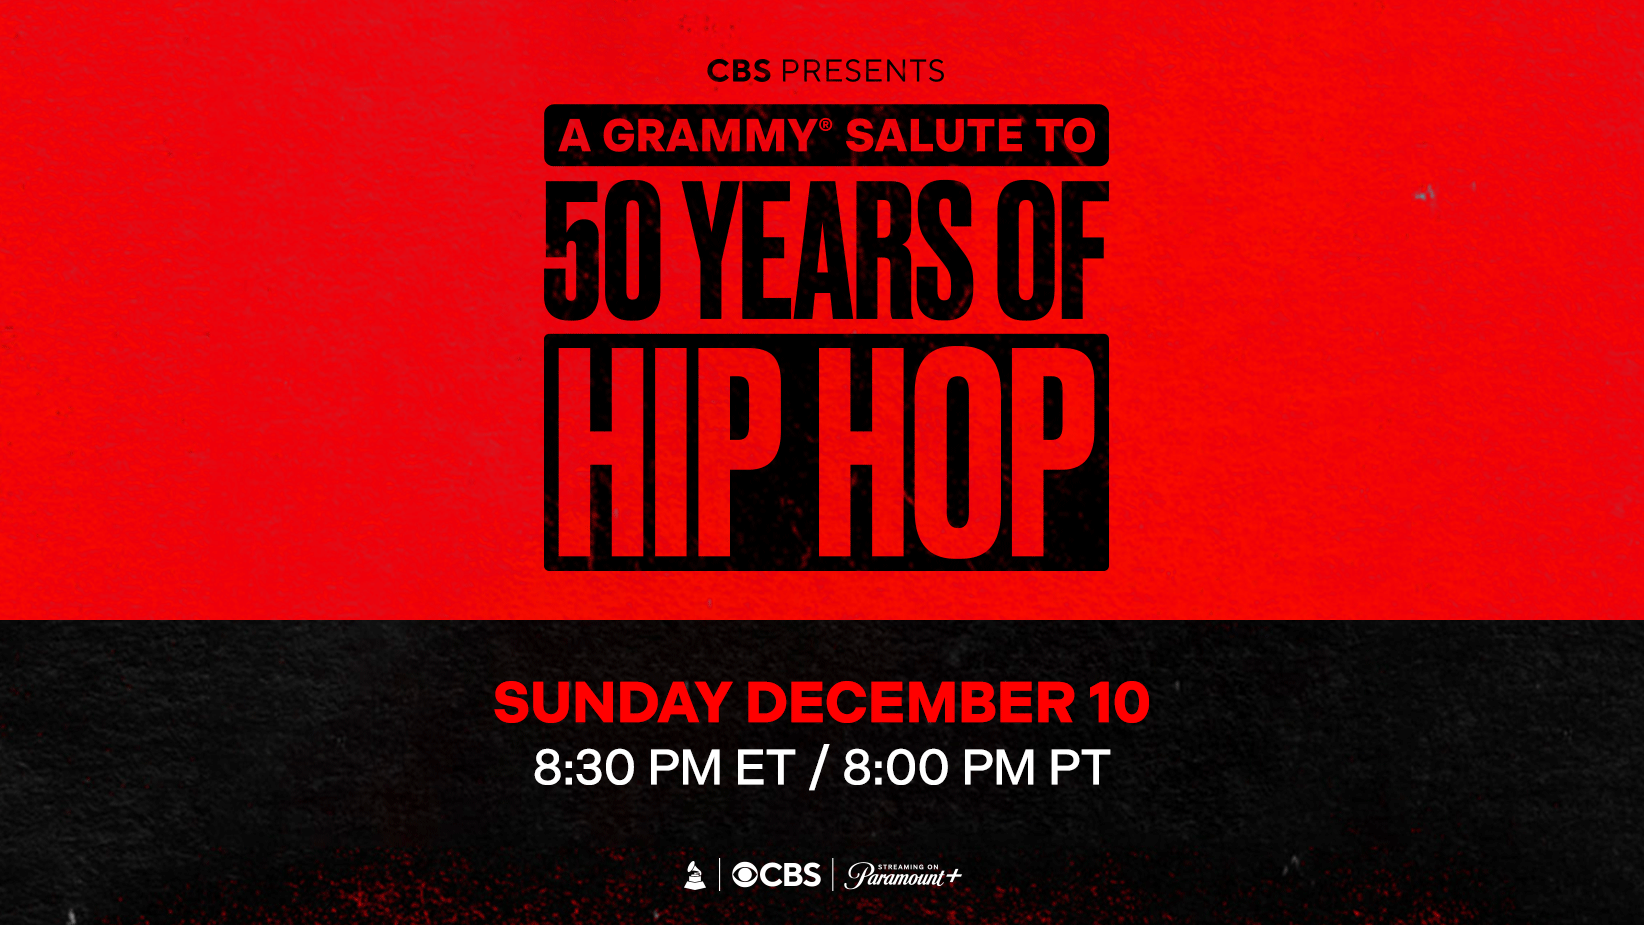 Kool DJ Red Alert Reflects On The Progression Of Rap At "A GRAMMY Salute To 50 Years Of Hip-Hop"